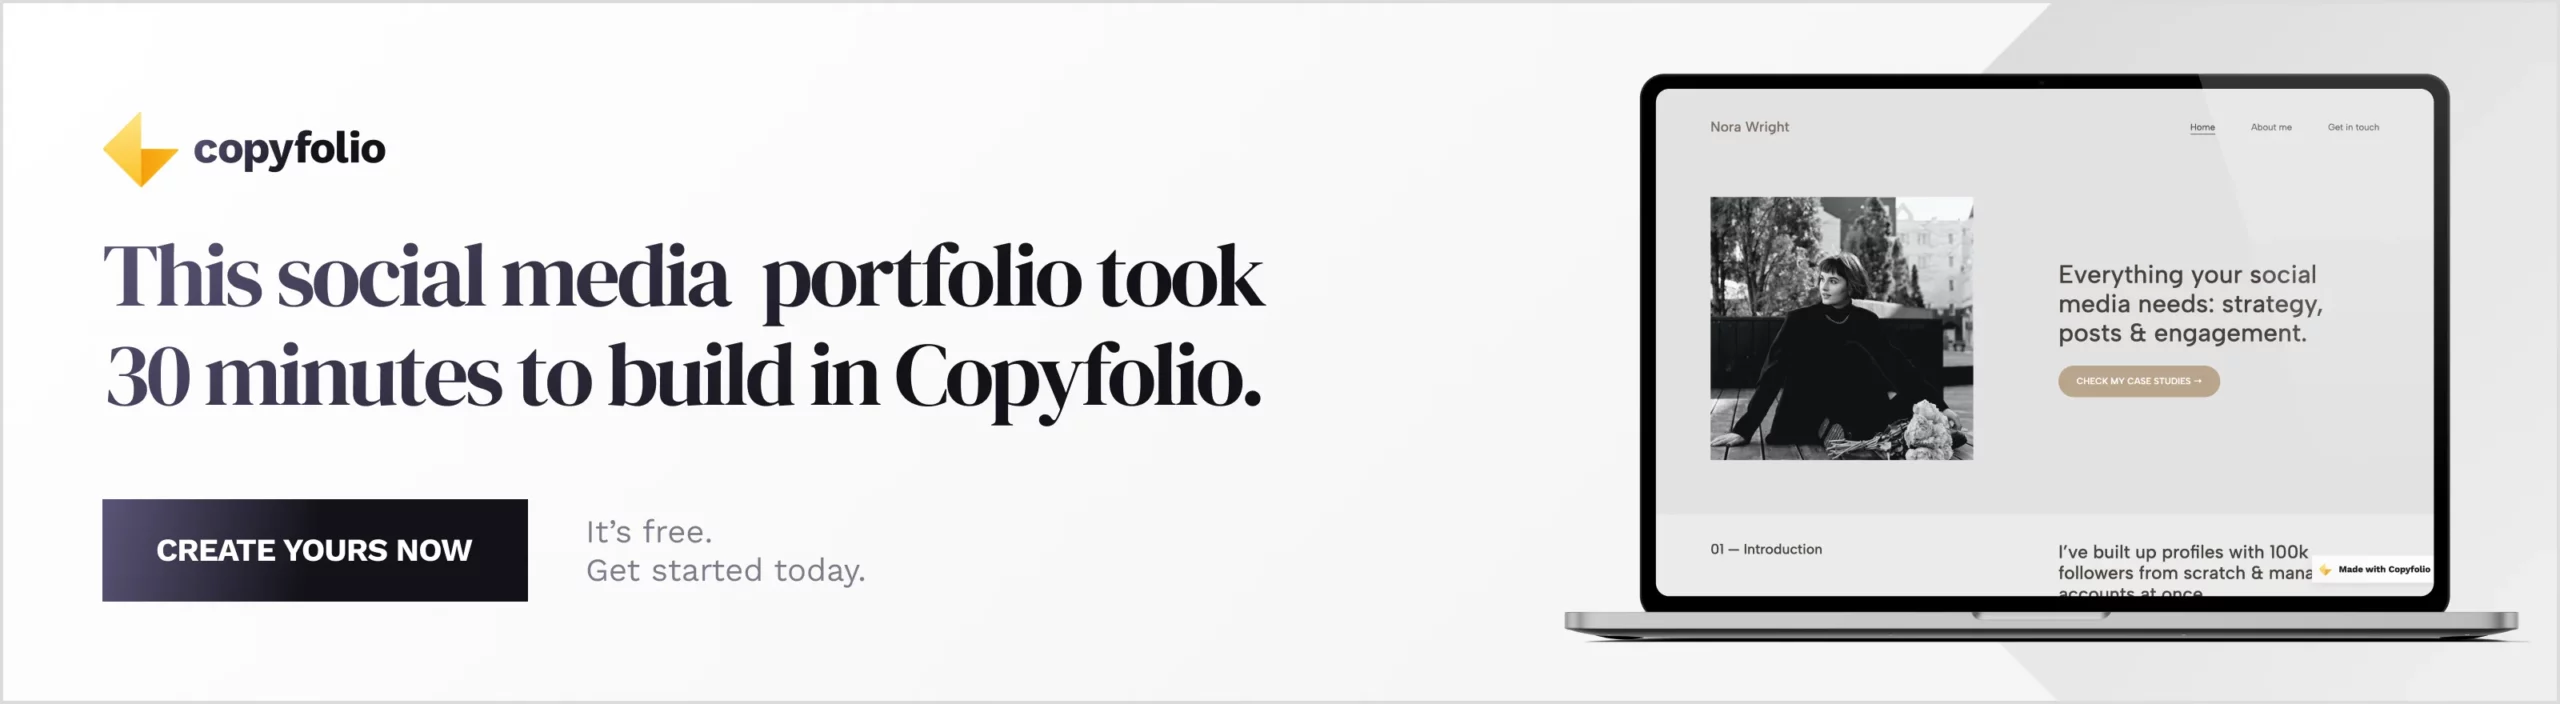 Banner, saying: This social media portfolio took 30 minutes to build in Copyfolio. Under the tagline, there's a button saying "Create yours now". Next to them on the right side there's a screenshot of a social media portfolio website in a laptop mockup.